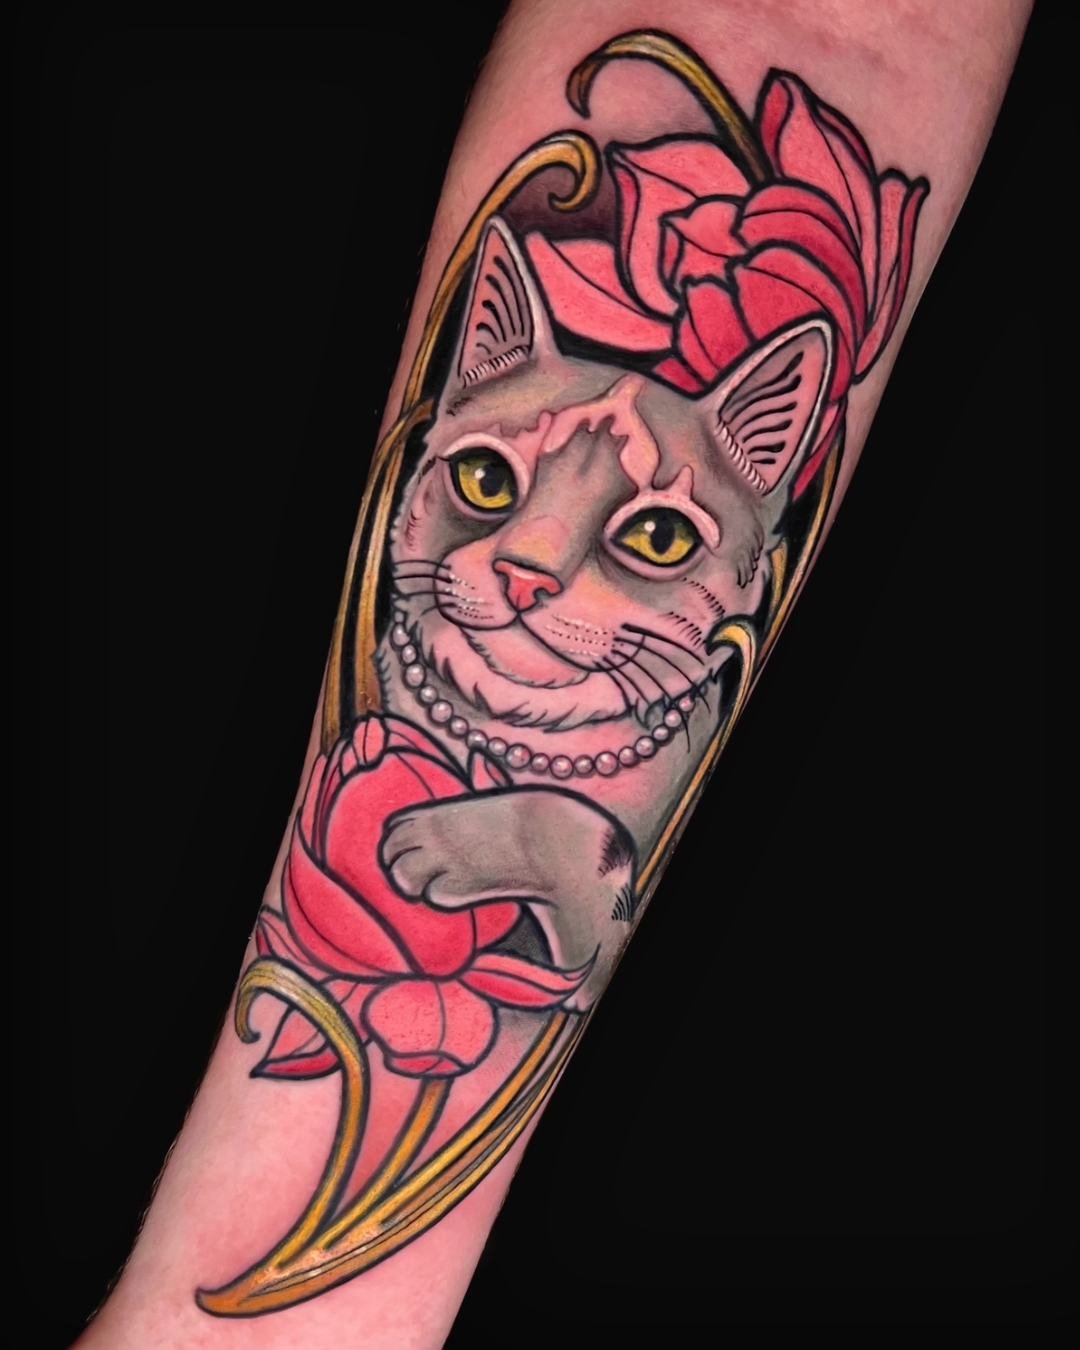 Meow meow meow meooooww *clears throat* 

What we meant to say was, check out this STUNNING Art Nouveau cat portrait by @cortneynorton ✨

She loves adapting pets, critters, and varmints alike in her signature Art Deco and Art Nouveau styles 🐾

Ready